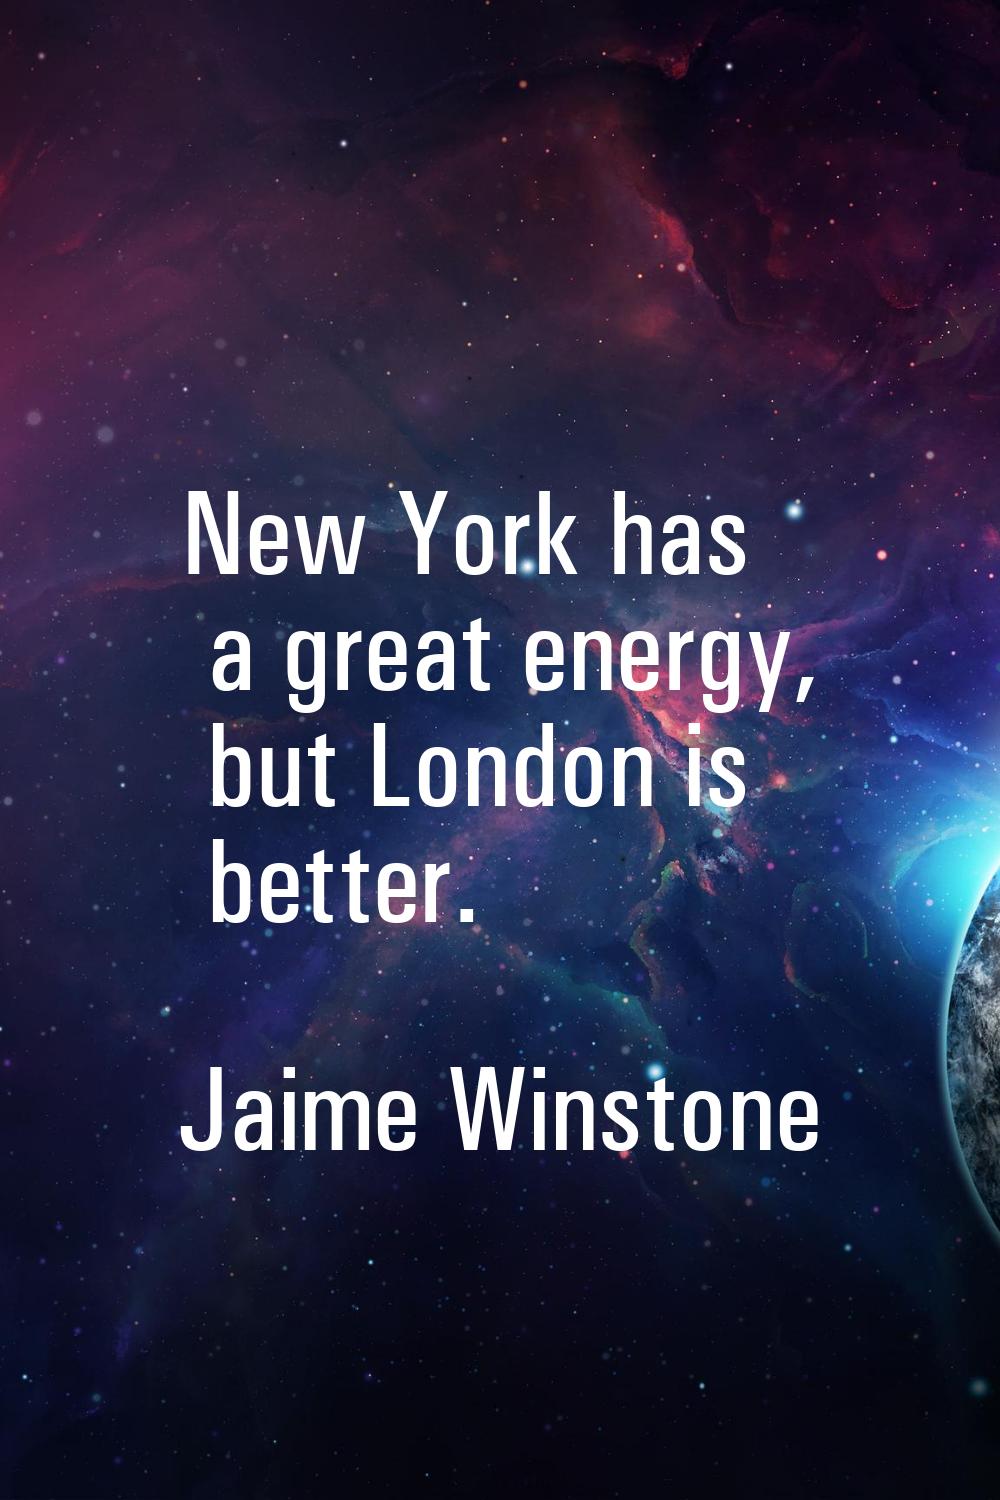 New York has a great energy, but London is better.